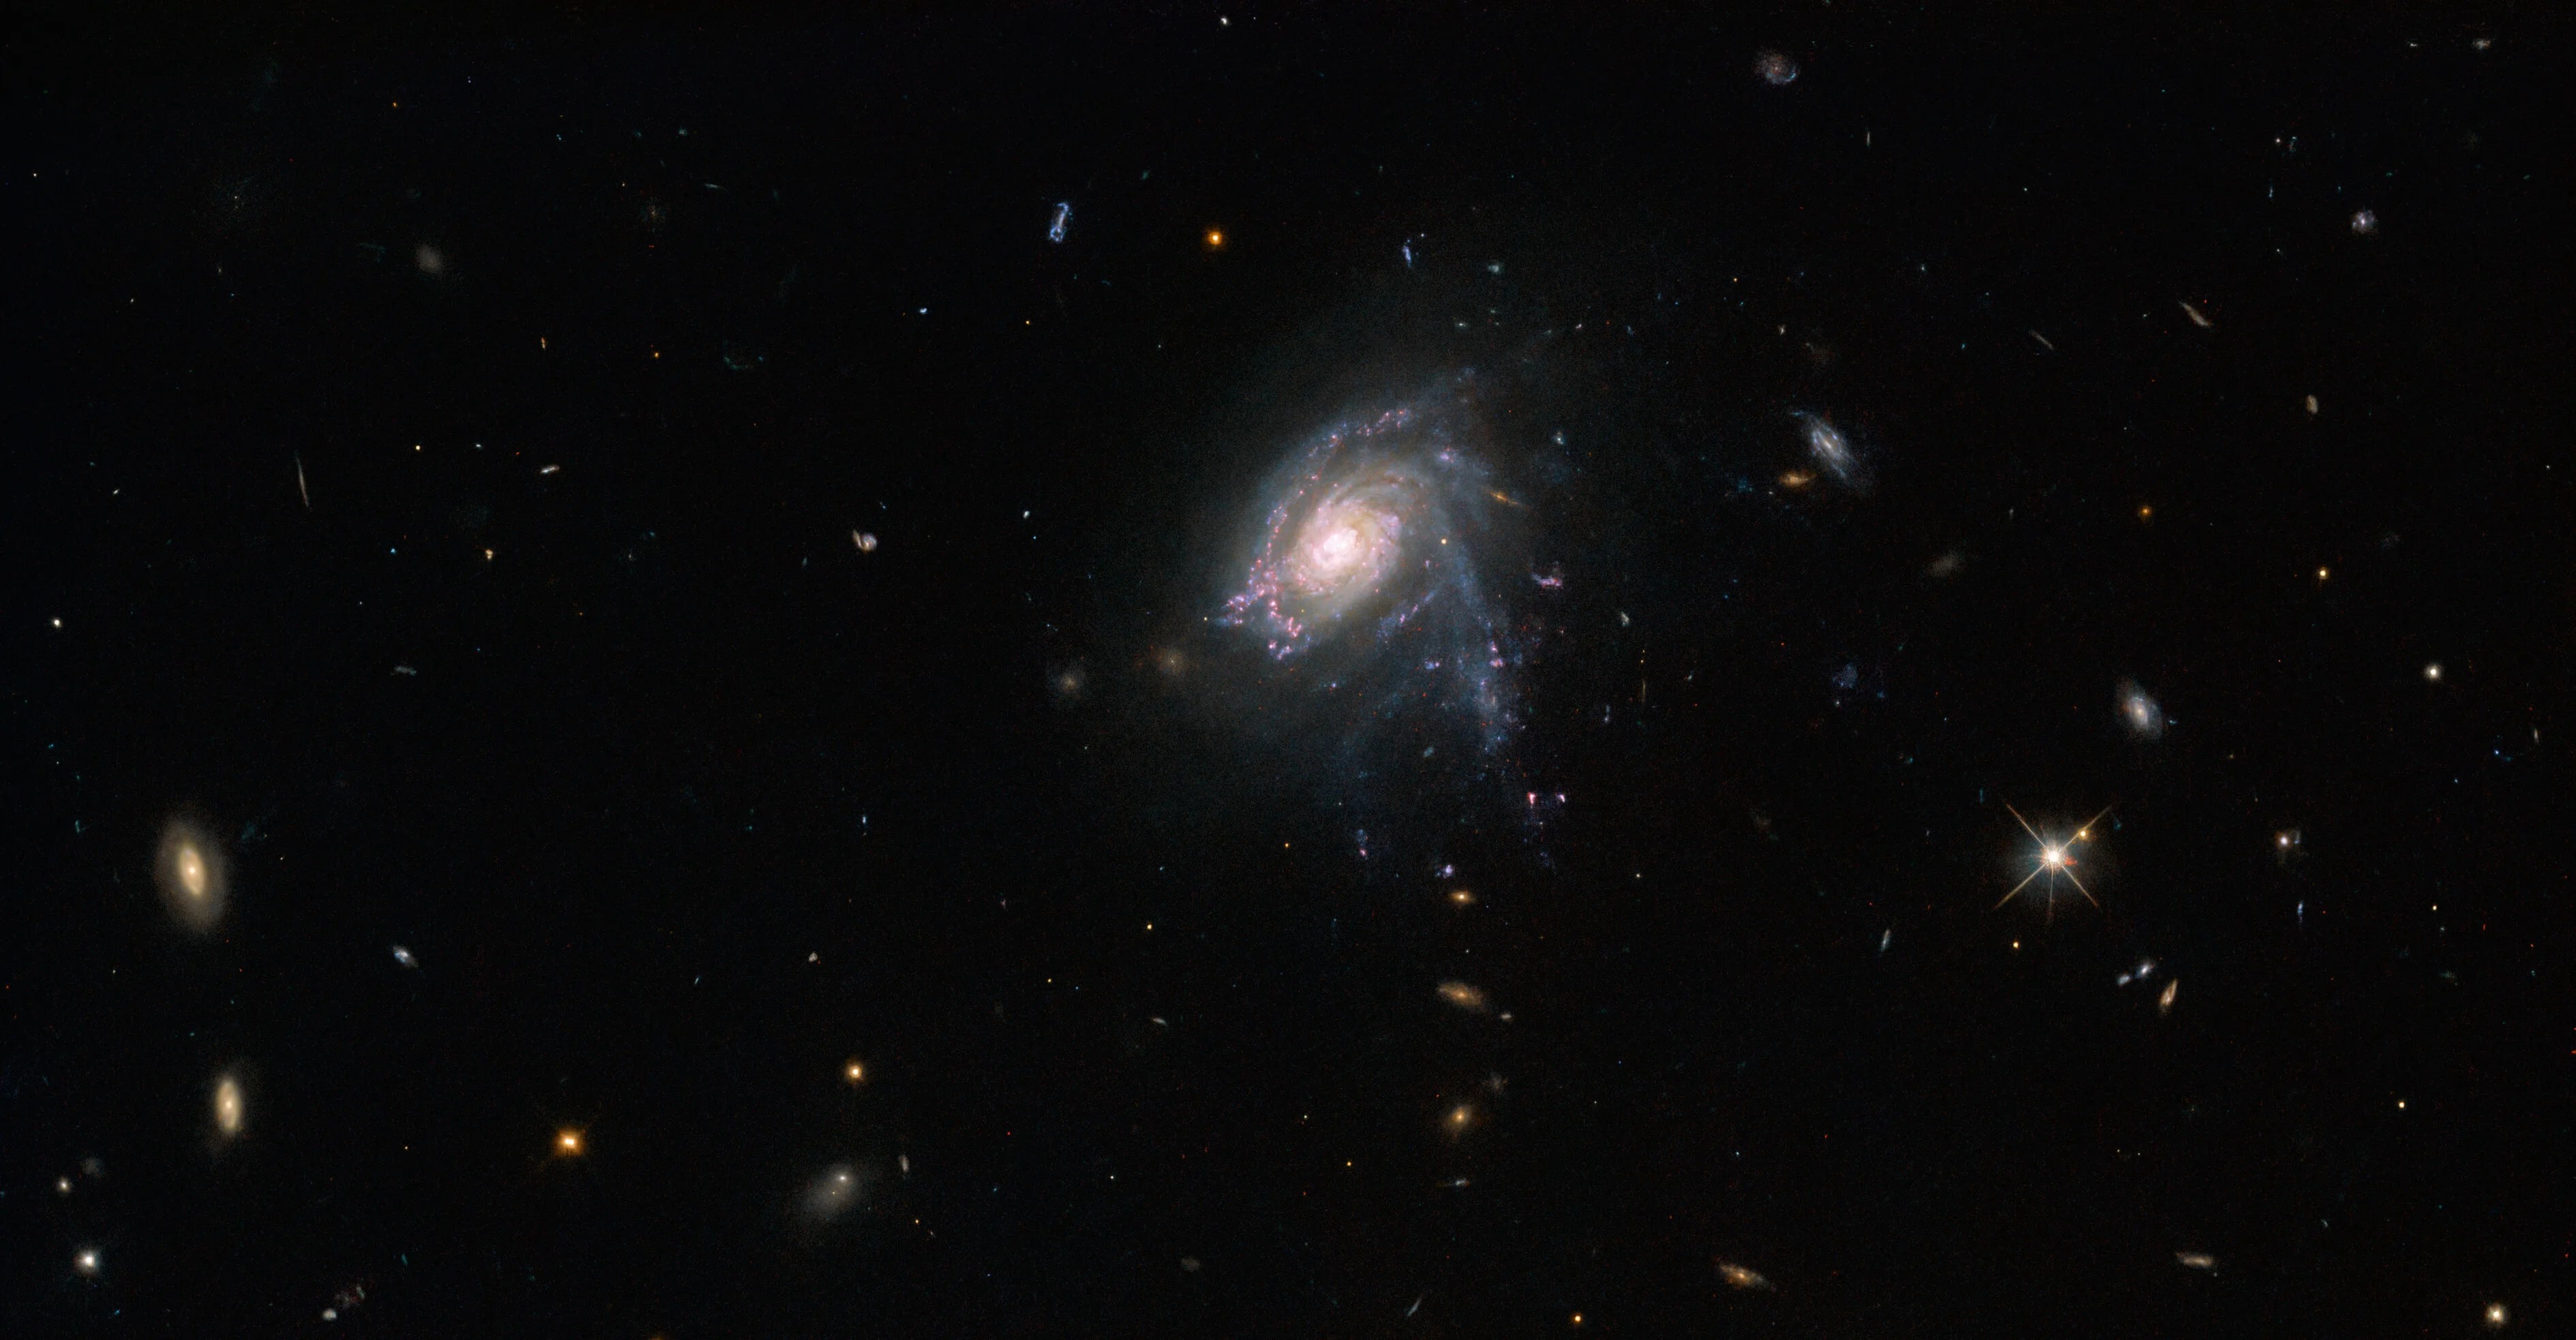 A spiral galaxy. Its spiral arms are studded with many pink spots, especially around the top of the galaxy. One arm is sticking out below the galaxy. From it and around the bottom of the galaxy, faint gas streams away, while little gas is visible above the galaxy. The galaxy is quite small in the center of a dark background, where a few smaller galaxies of various shapes and sizes hang.